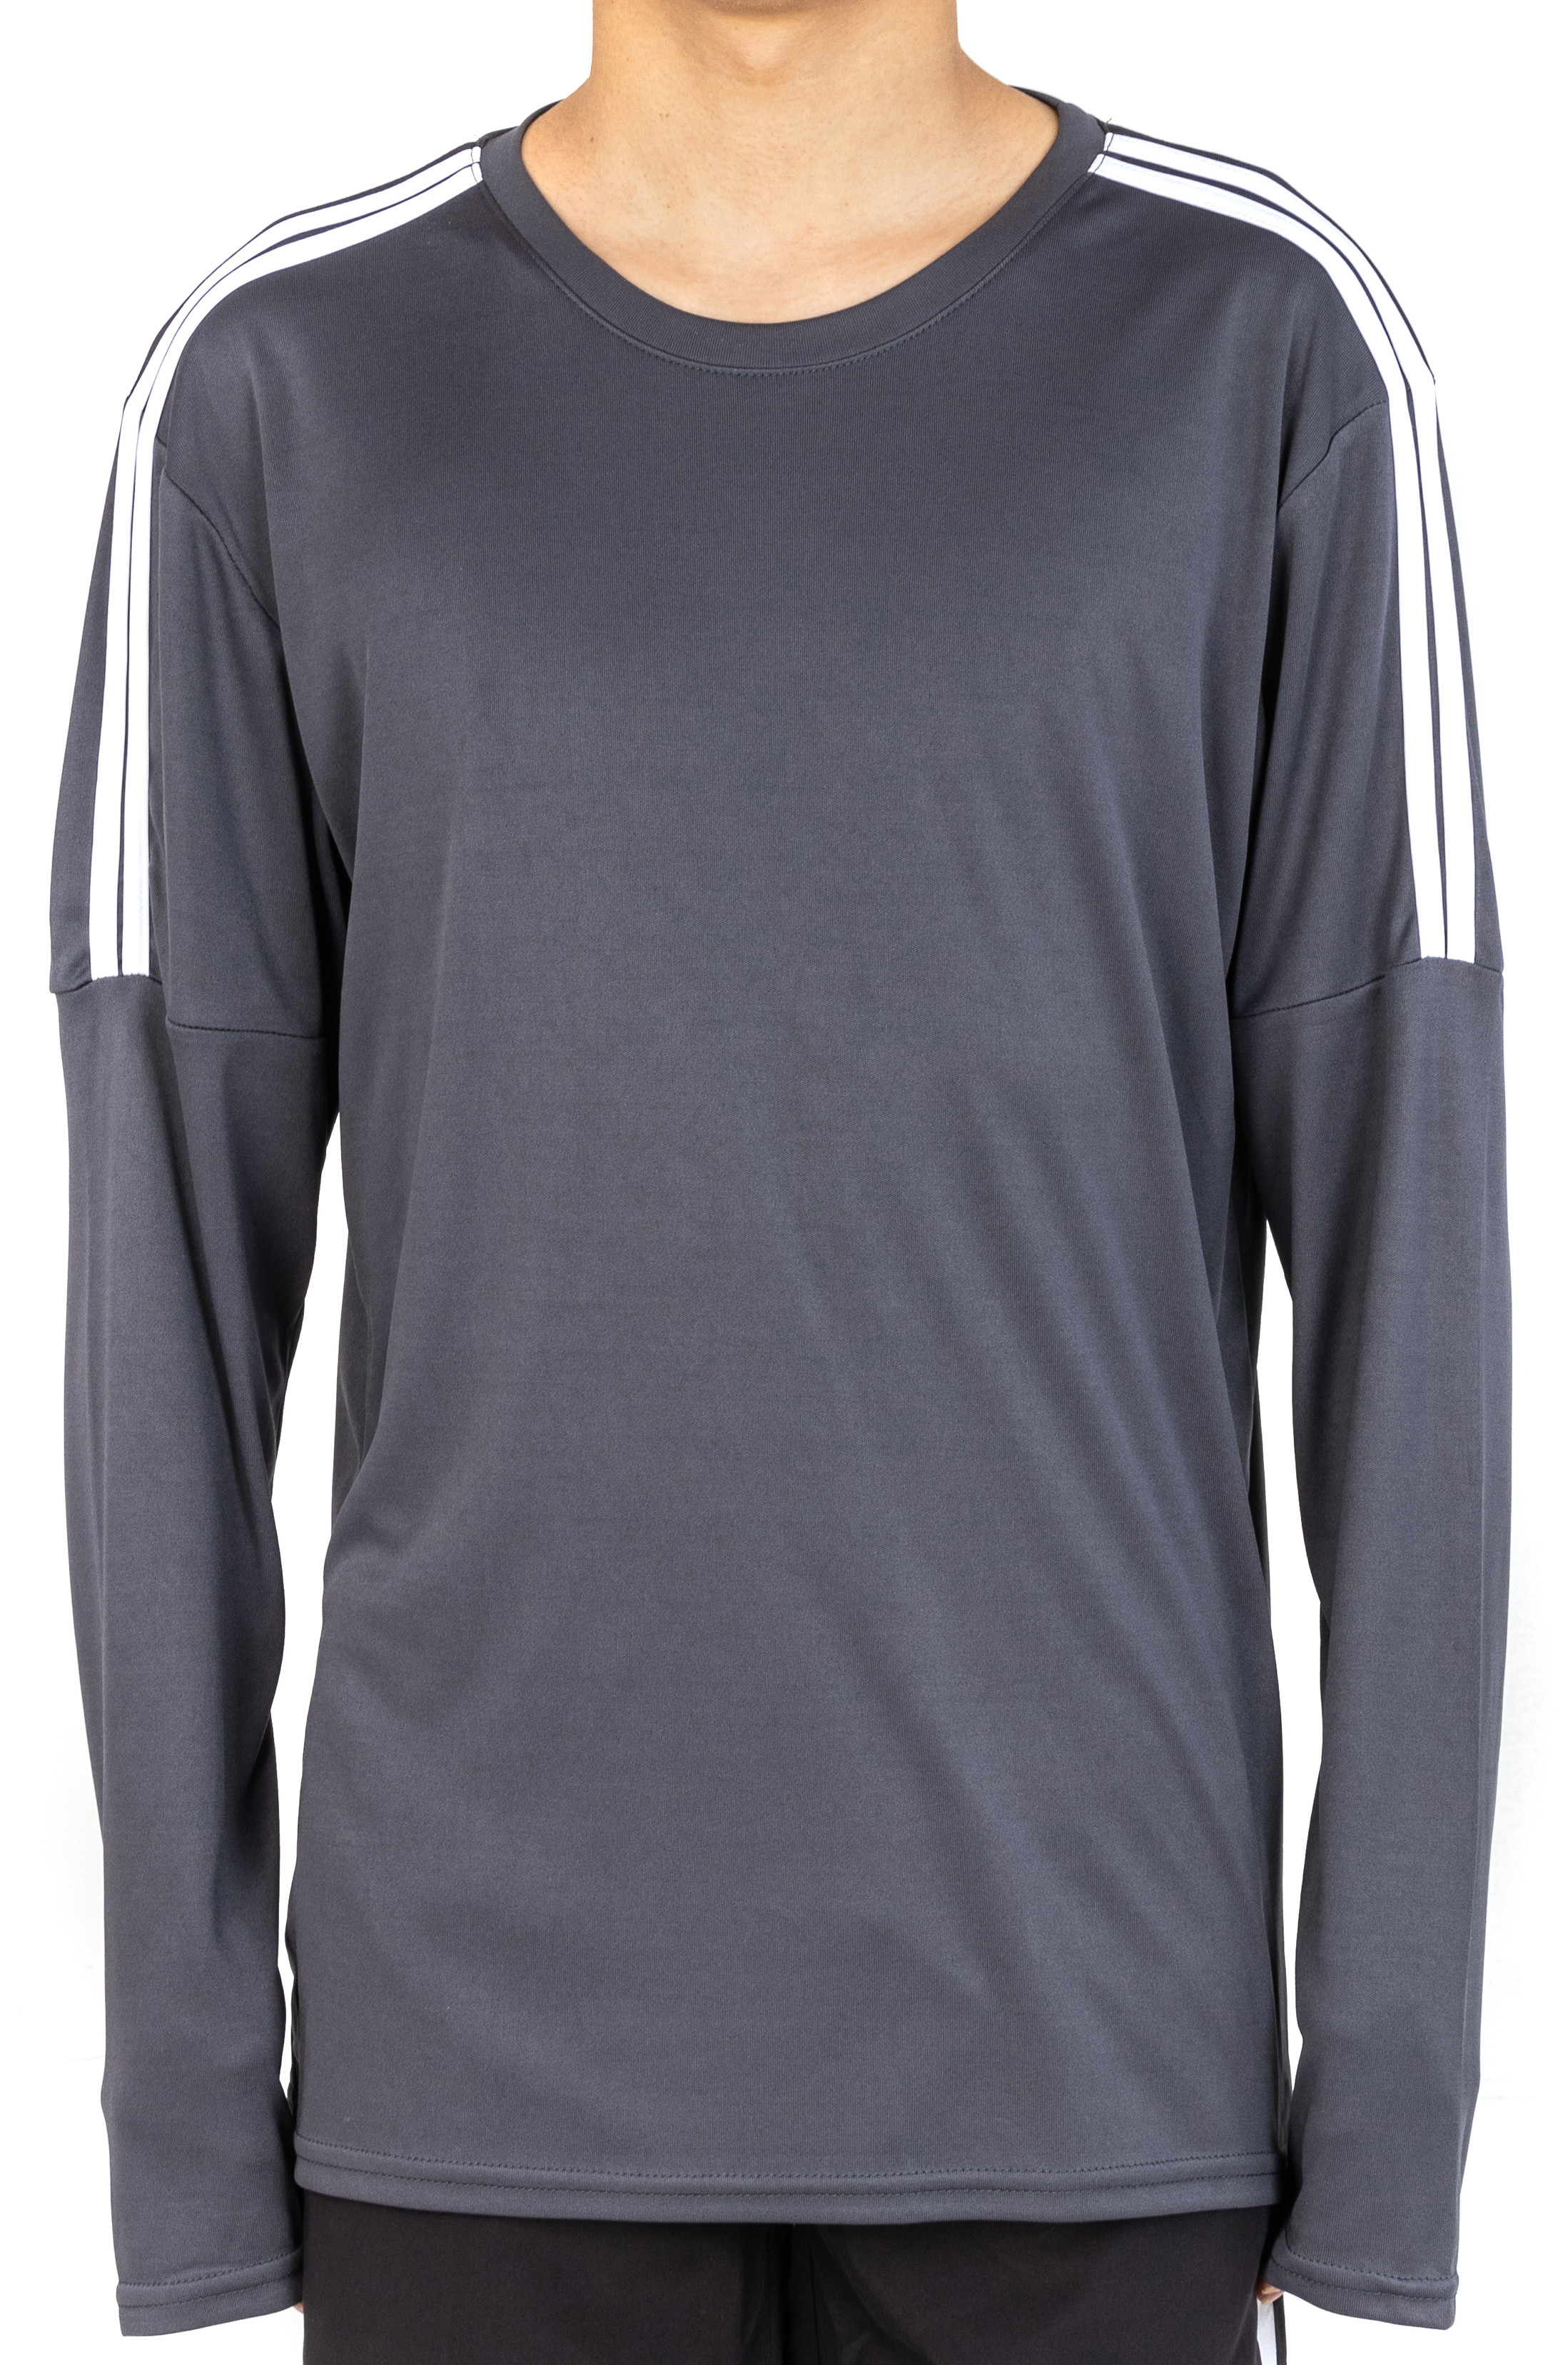 Quality C Neck Comfortable Gray 140gsm Long Sleeve Tshirt Warming Keep for sale